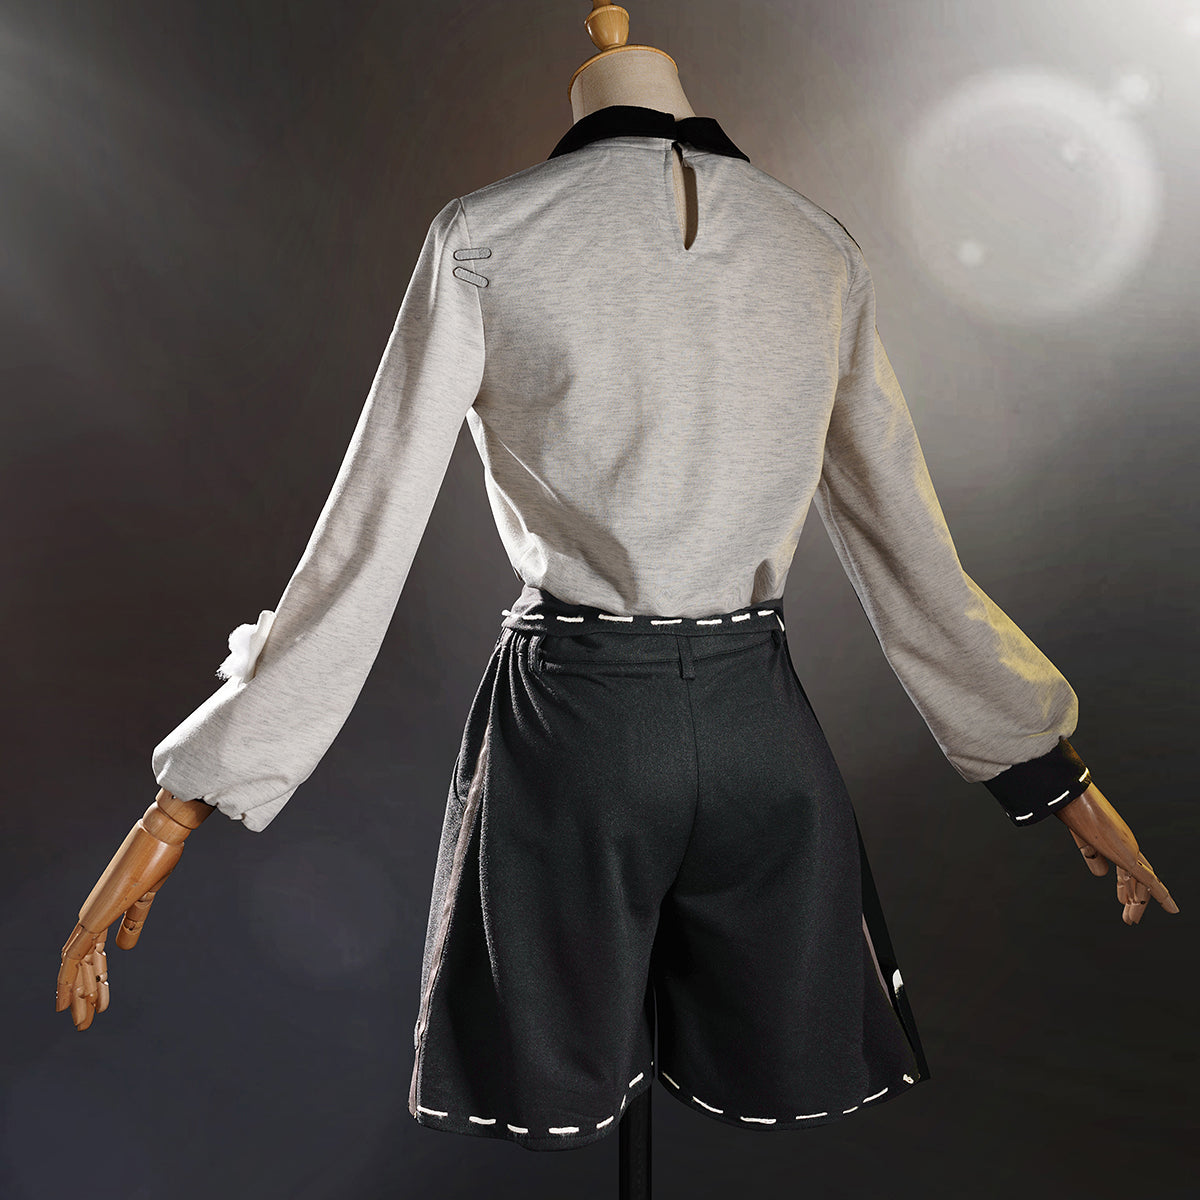 Identity V Lily Barriere Cheerleader Cosplay Costume